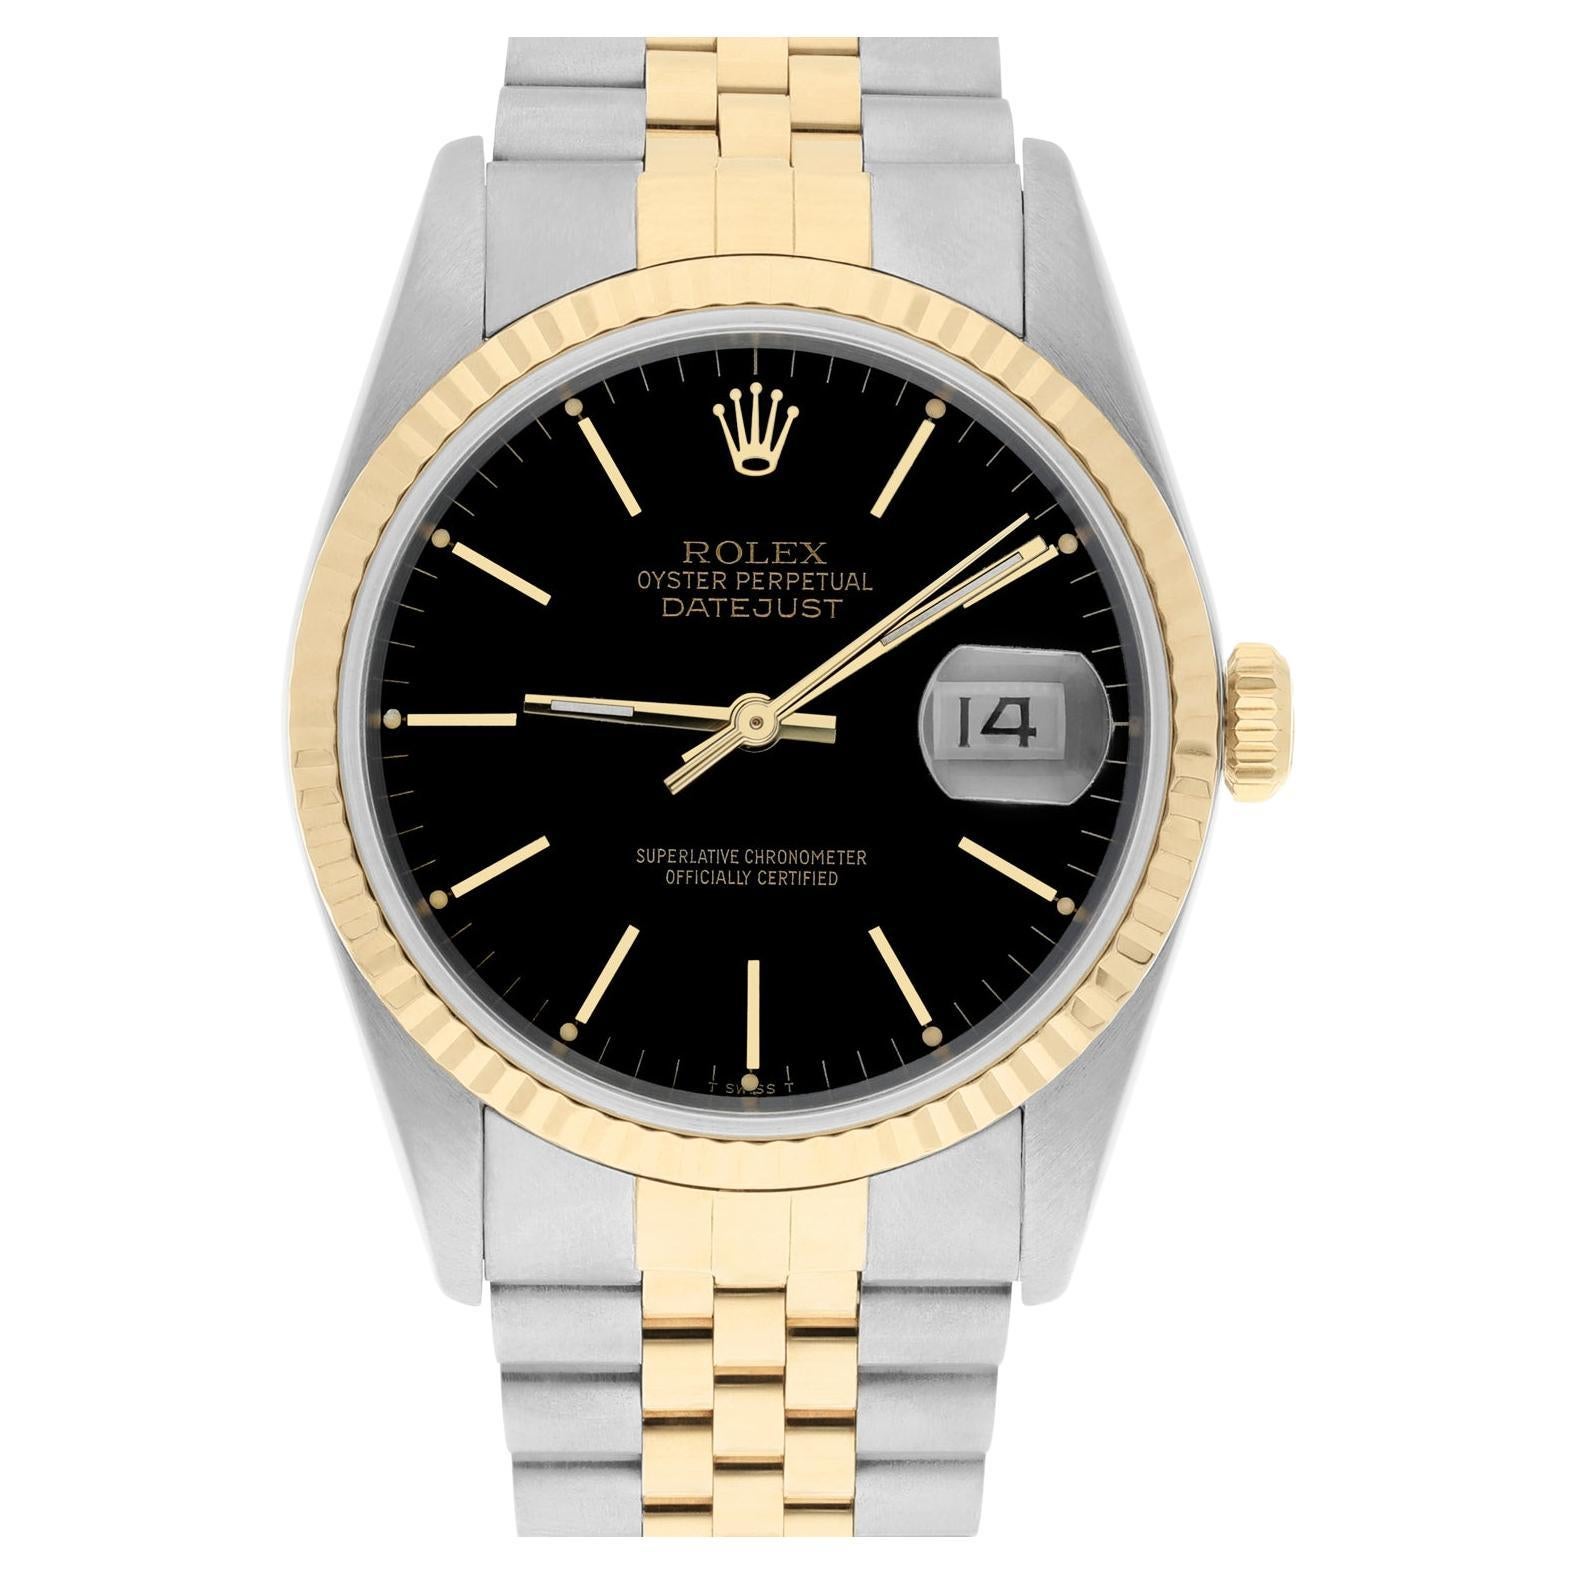 Rolex Datejust 36mm Two Tone Black Index Dial Jubilee 16233 Circa 1993 For Sale